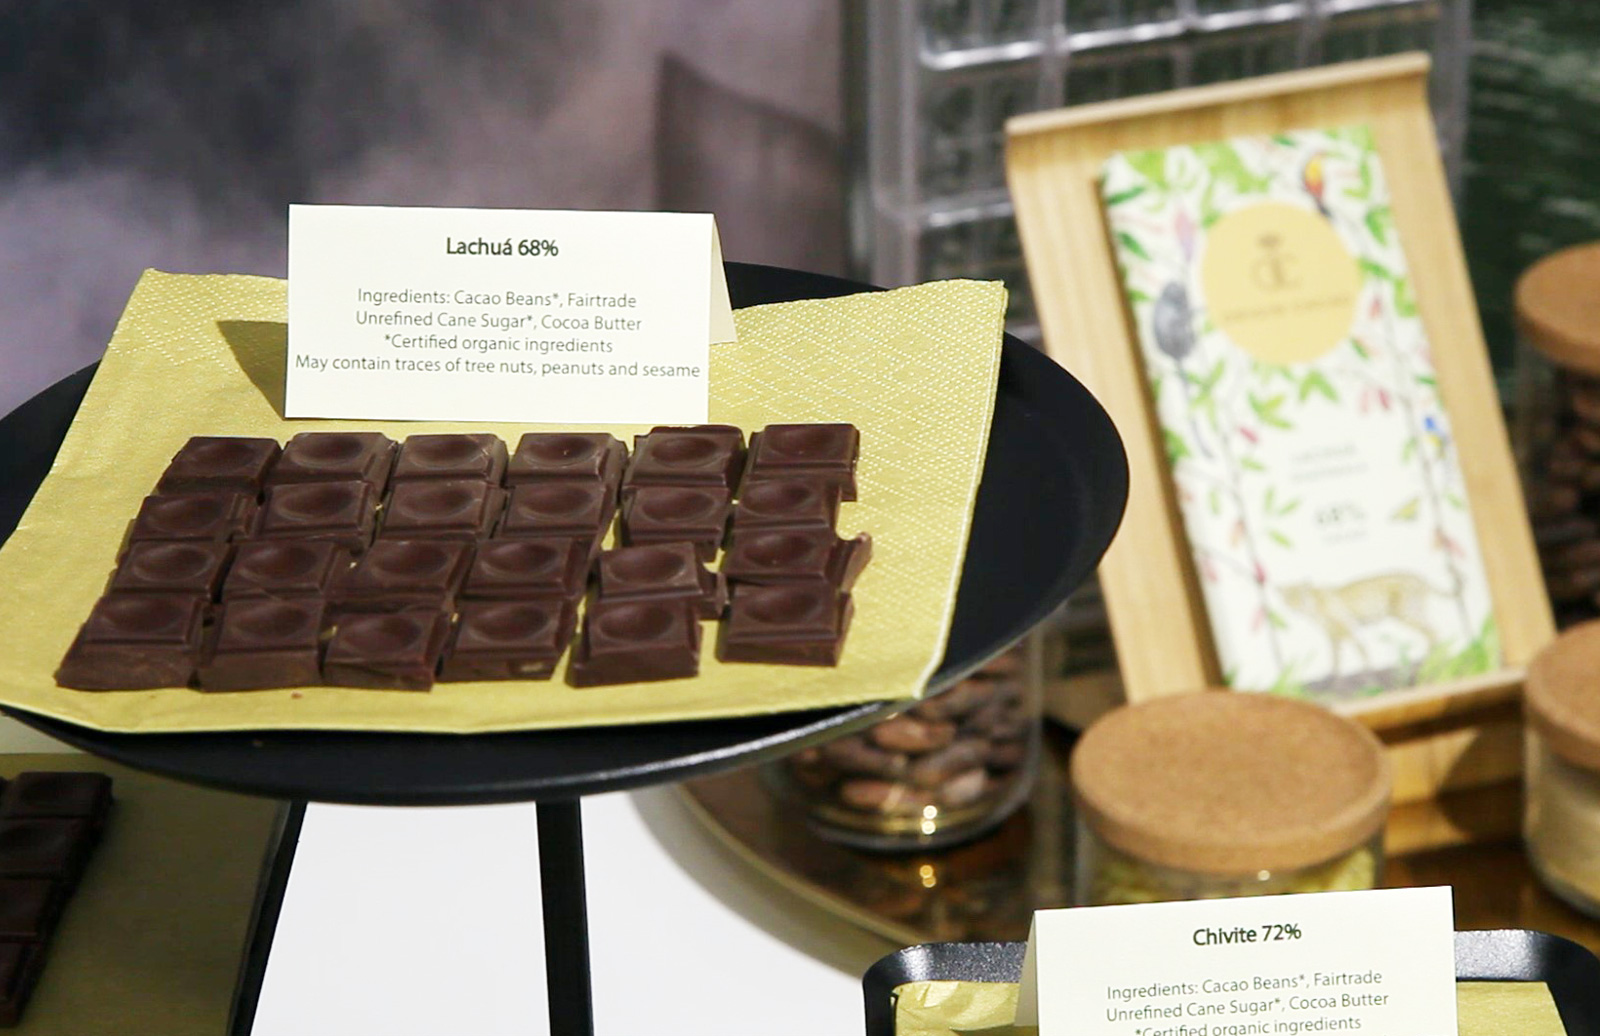 Chocolate Maker's Exhibition Stand in London